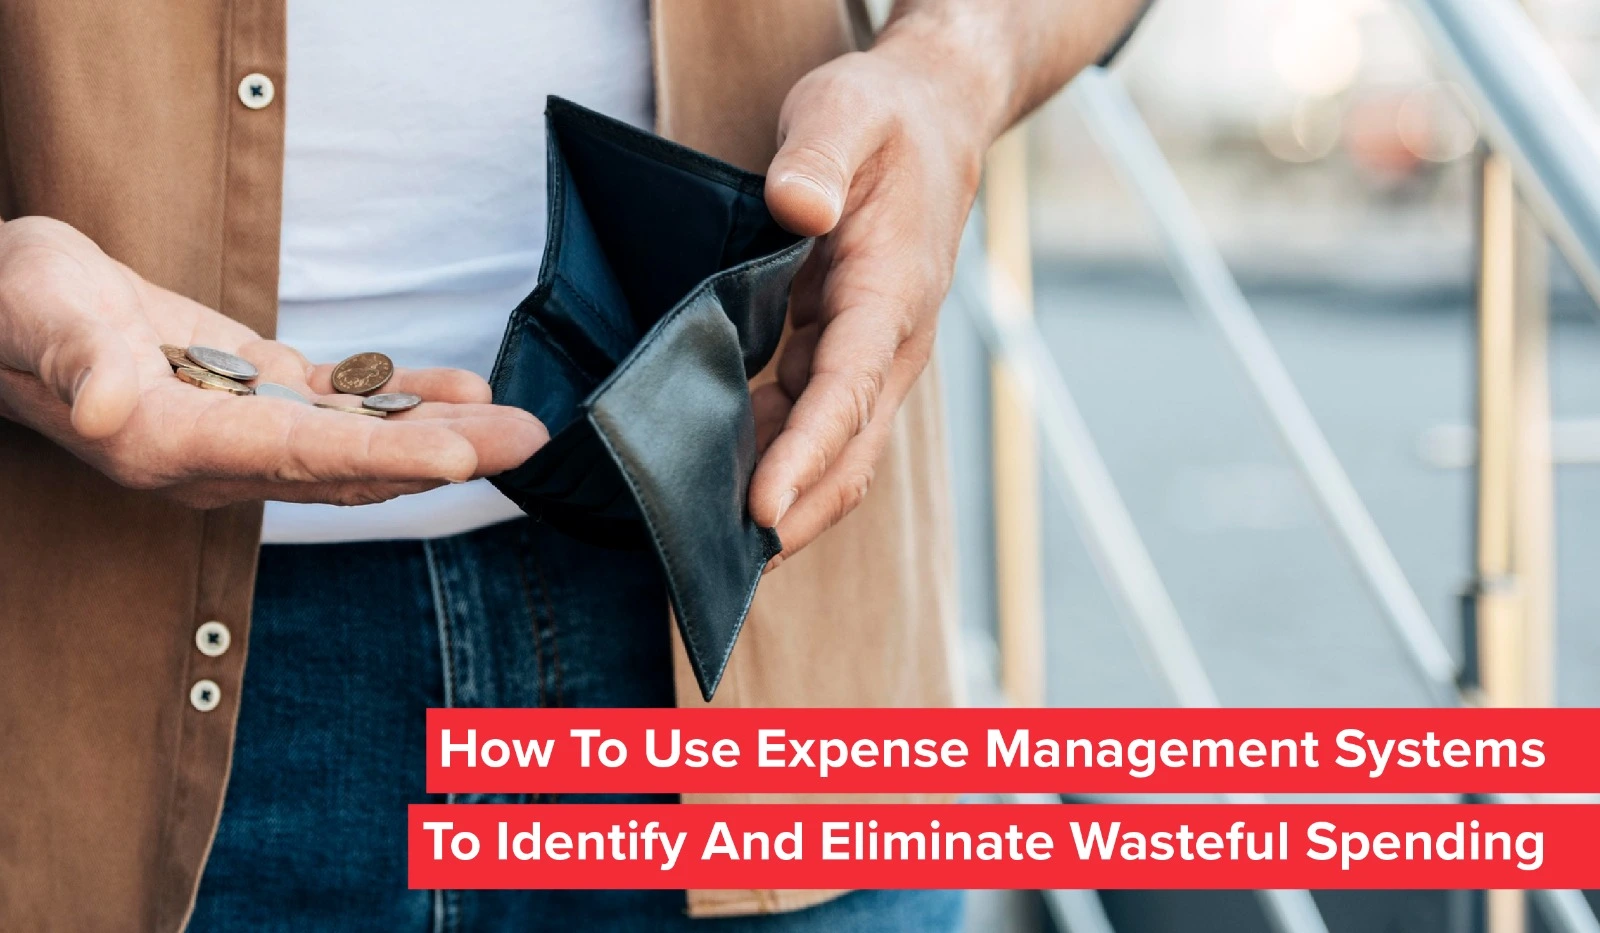 How To Use Expense Management Systems To Identify And Eliminate Wasteful Spending